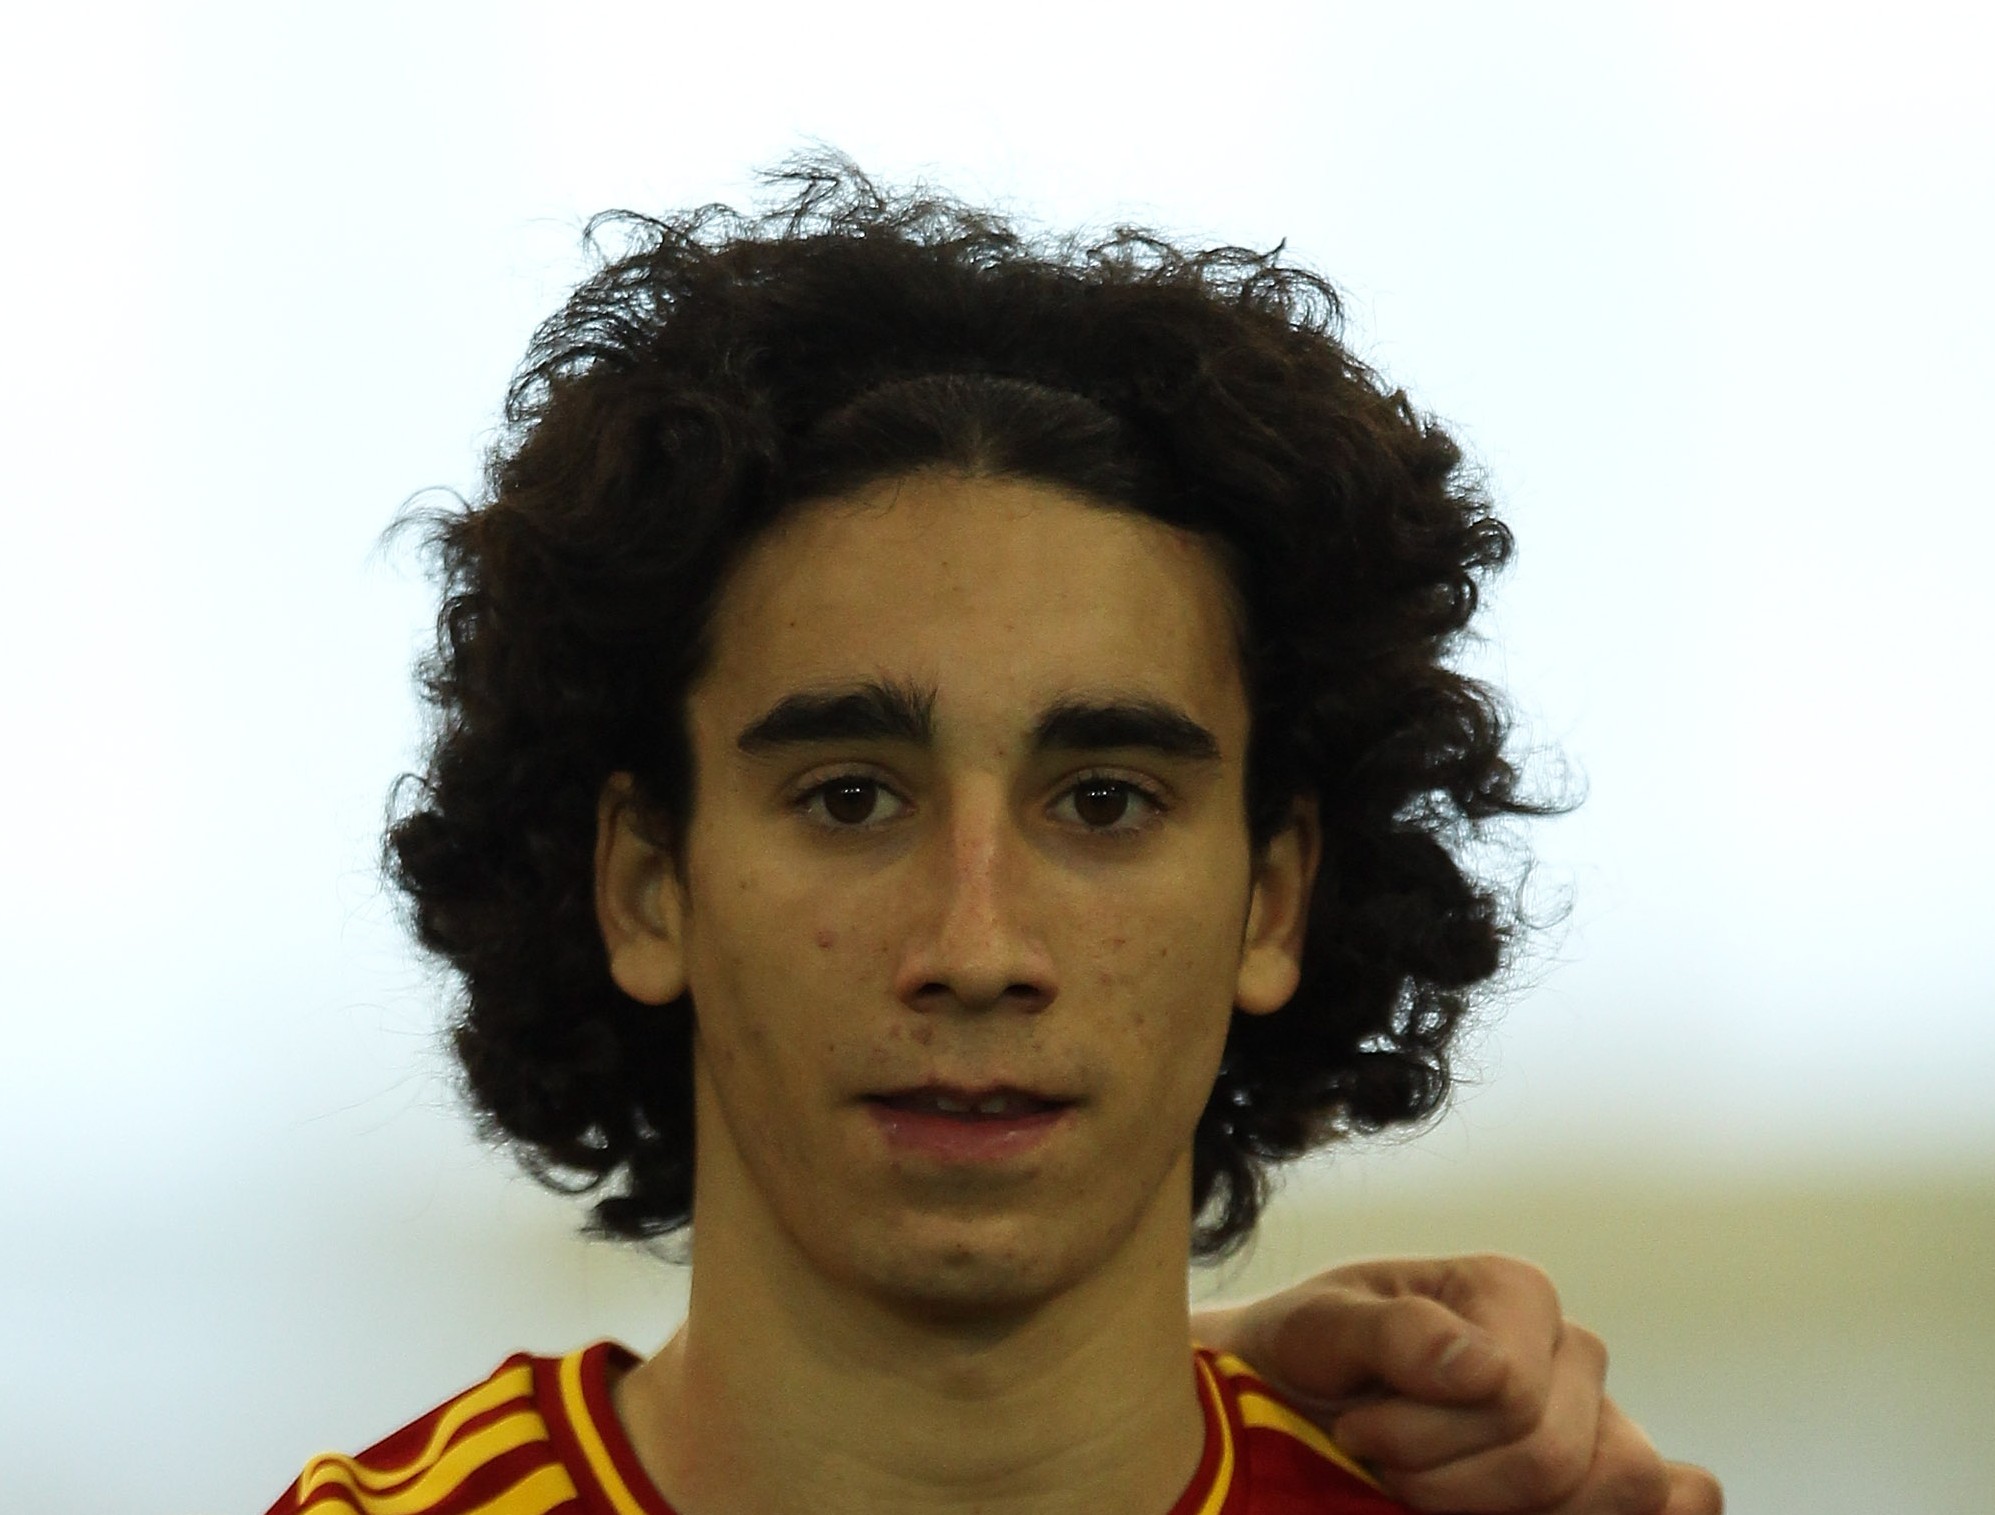 BURTON-UPON-TRENT, ENGLAND - FEBRUARY 09: Marc Cucurella of Spain looks on ahead of a U16 International match between England and Spain at St Georges Park on February 9, 2014 in Burton-upon-Trent, England.  (Photo by Ben Hoskins/Getty Images)